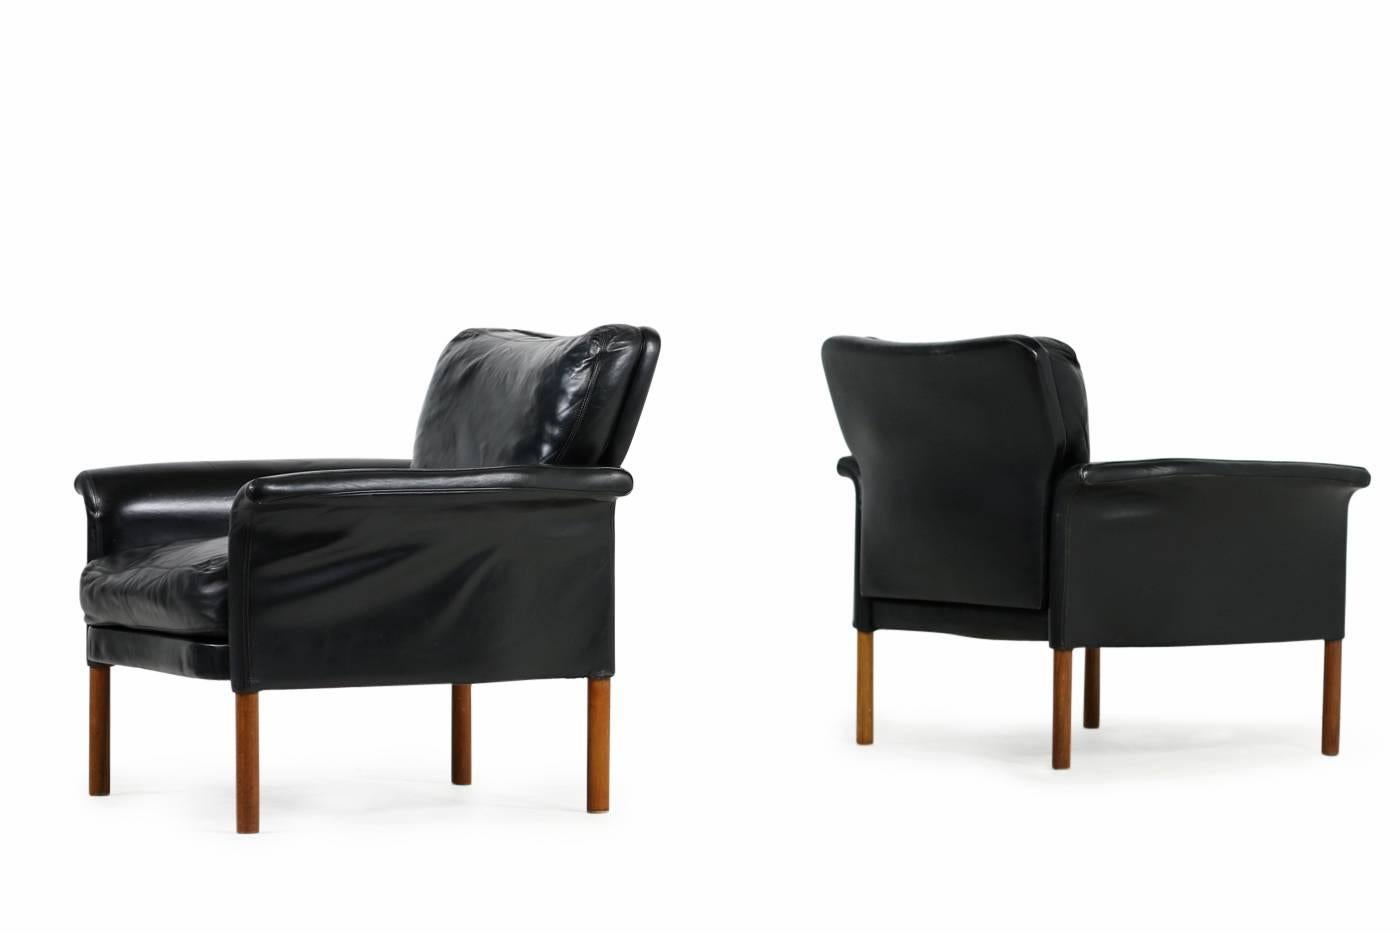 Beautiful pair of 1960s vintage black leather lounge chairs, cushions with down filling, very good condition, high quality furniture. Design attributed to Hans Olsen, solid teak legs. Great patina, no holes, leather in fantastic condition.
Matching